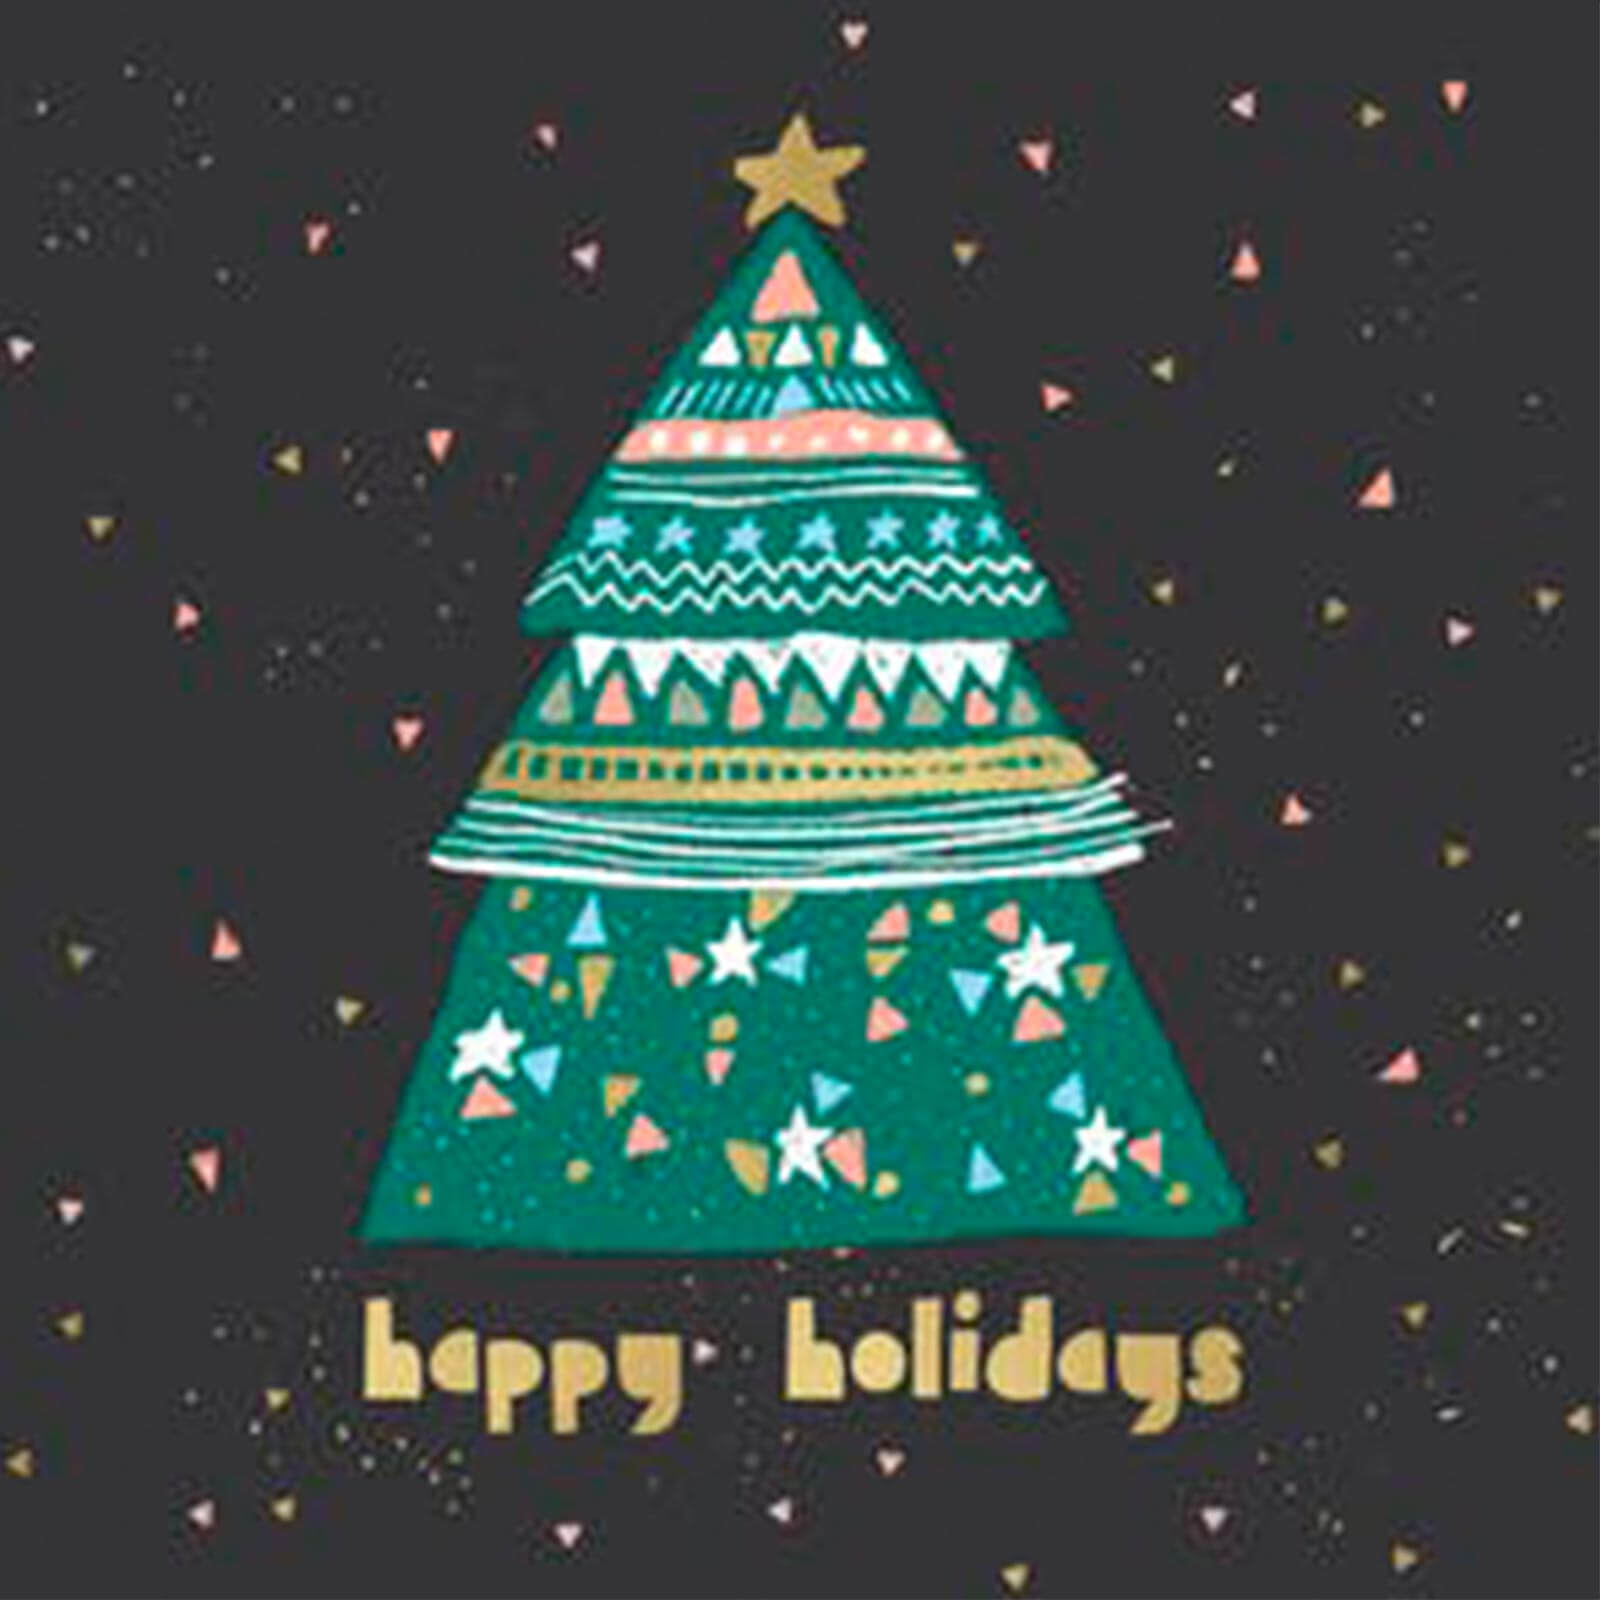 Free Christmas Cards To Print Out And Send This Year Within Print Your Own Christmas Cards Templates